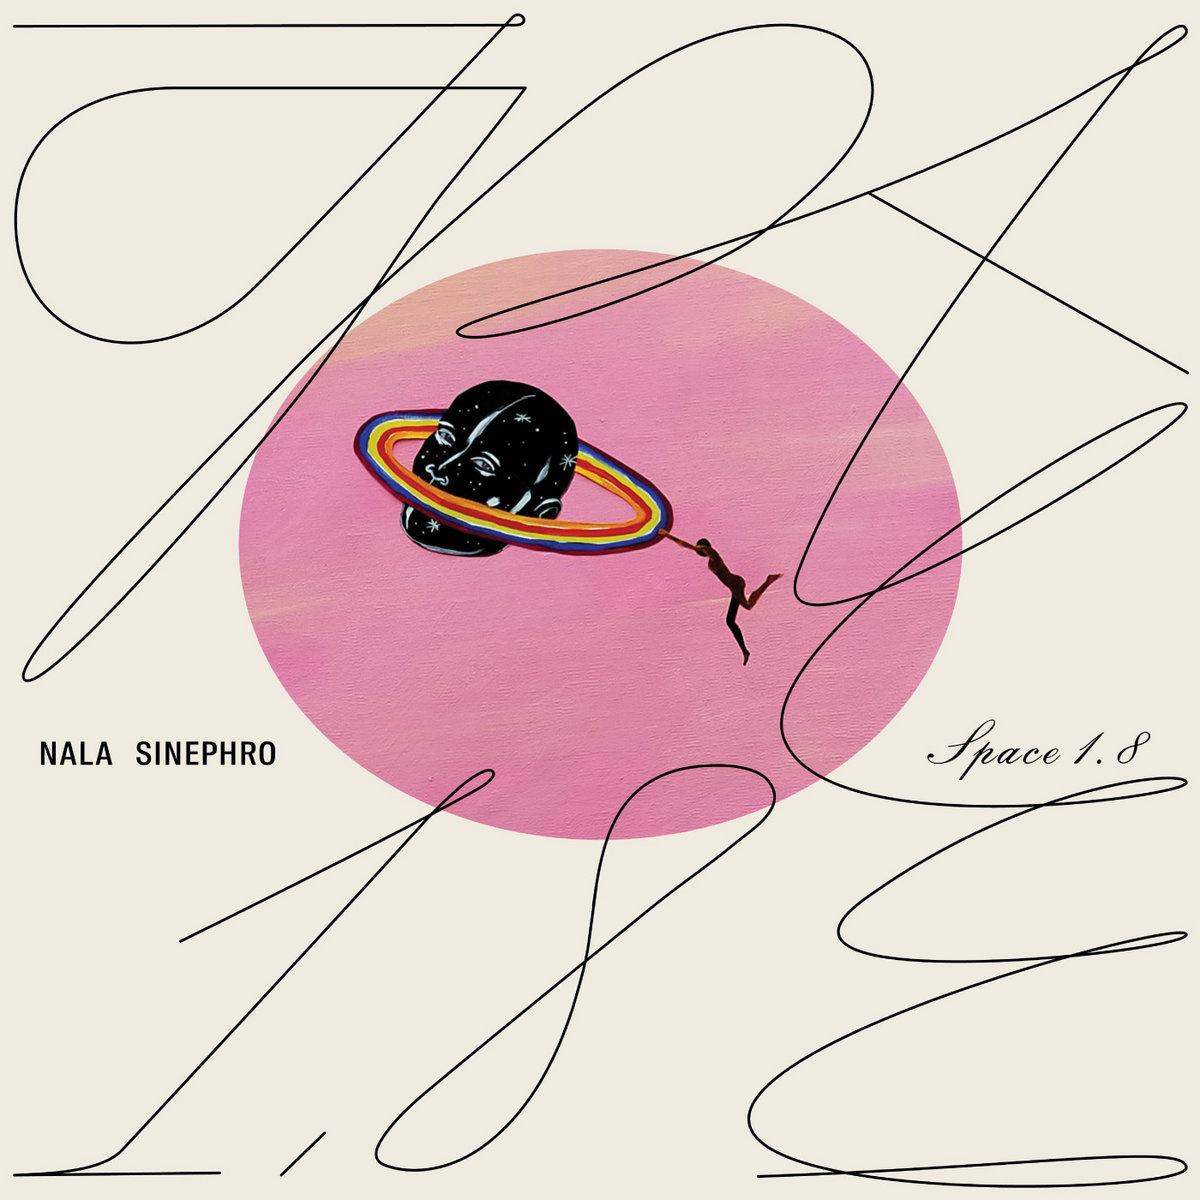 Album of the Month March 2022 Nala Sinephro - Space 1.8